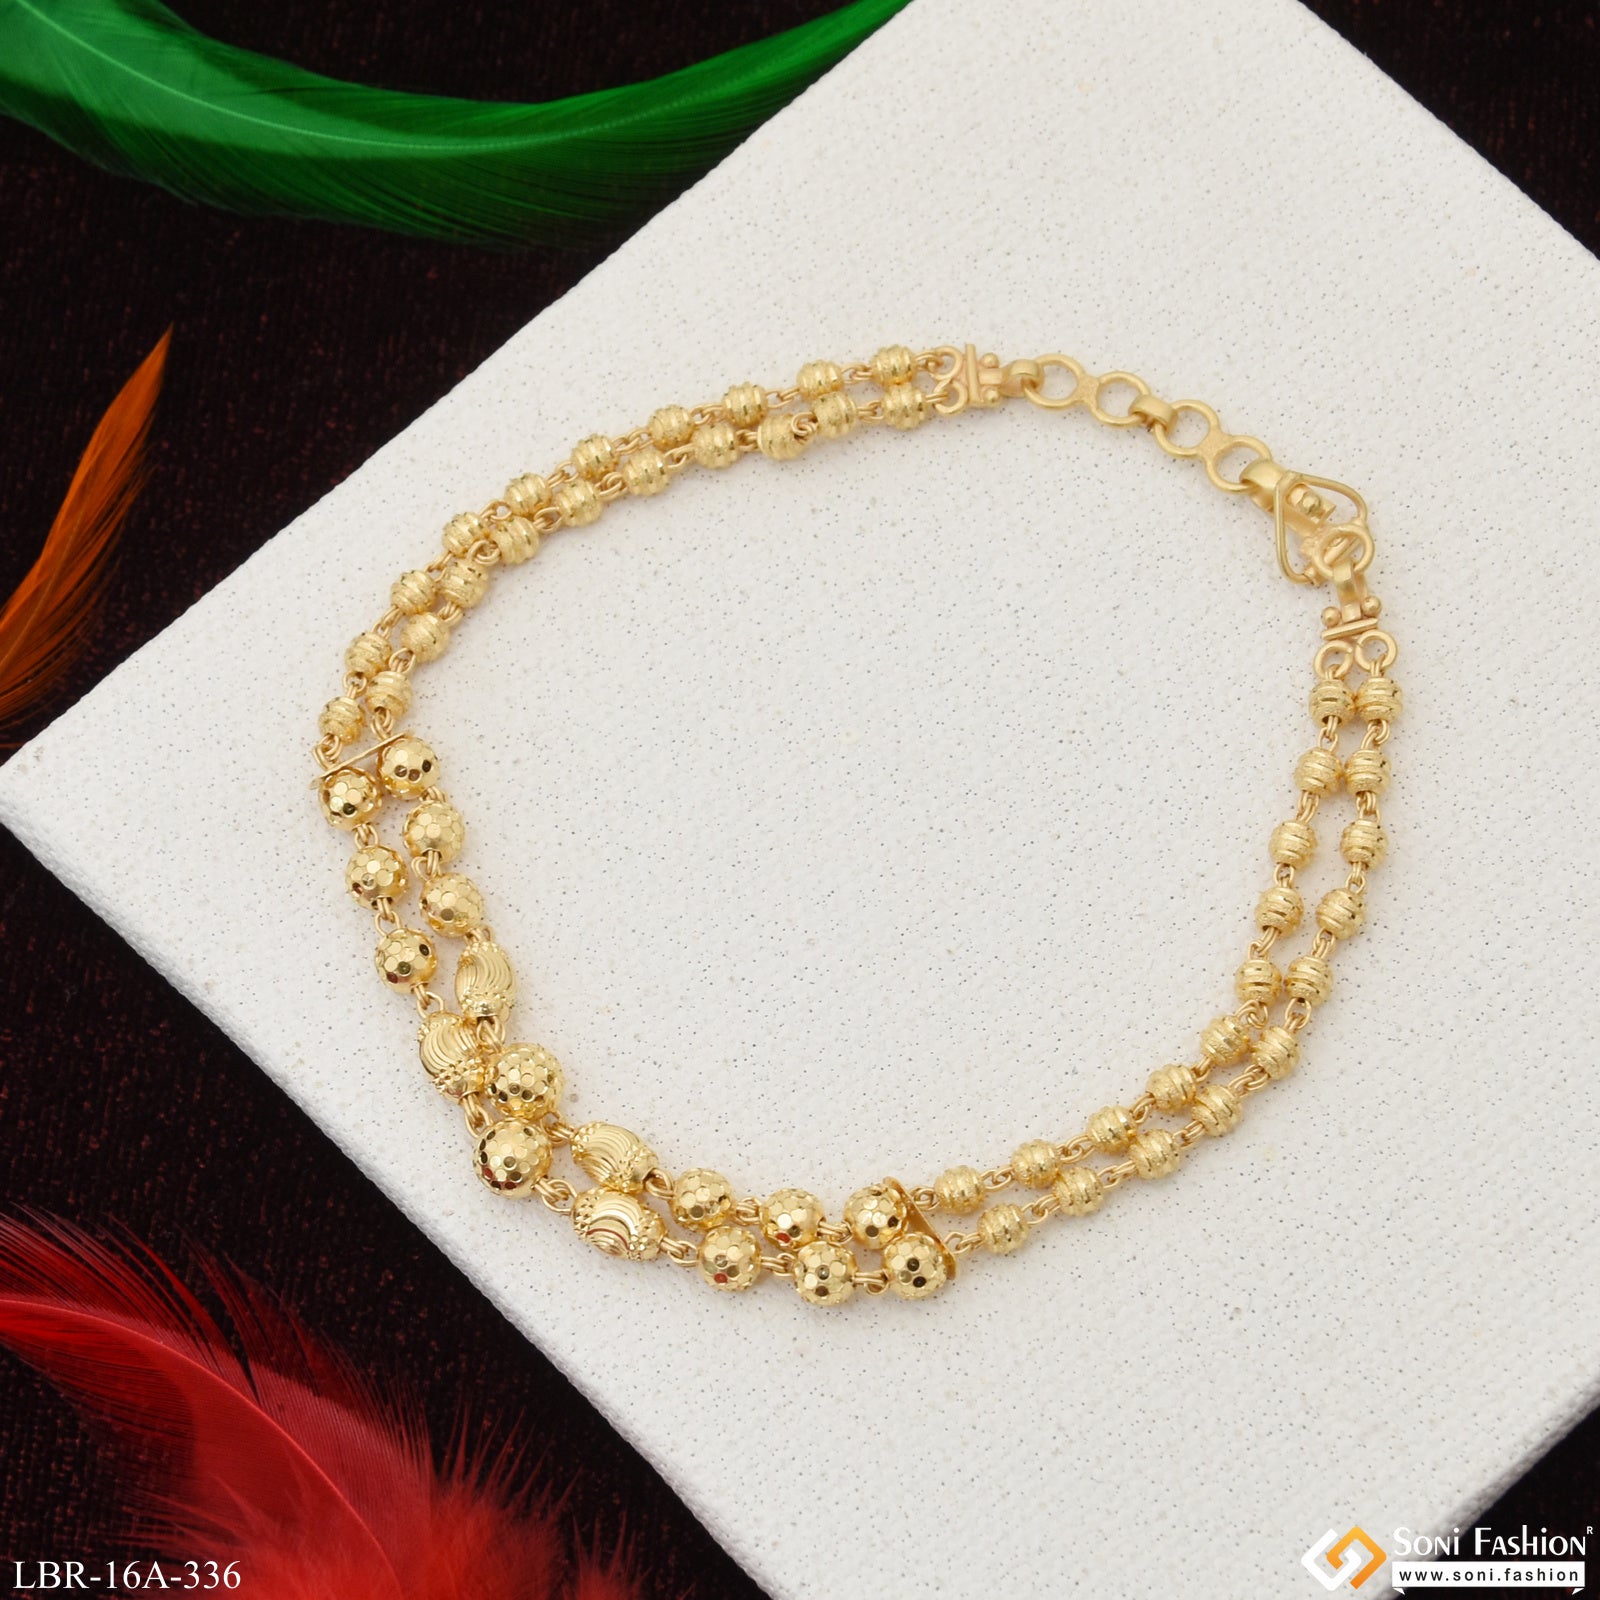 Buy Custom Solid 24k 9999 Gold 98g Wide 6.2mm Hammered Ancient Rome Set 2  Bracelets Durable Bangles Thick 2mm Women Men Price is for 2 Online in  India - Etsy